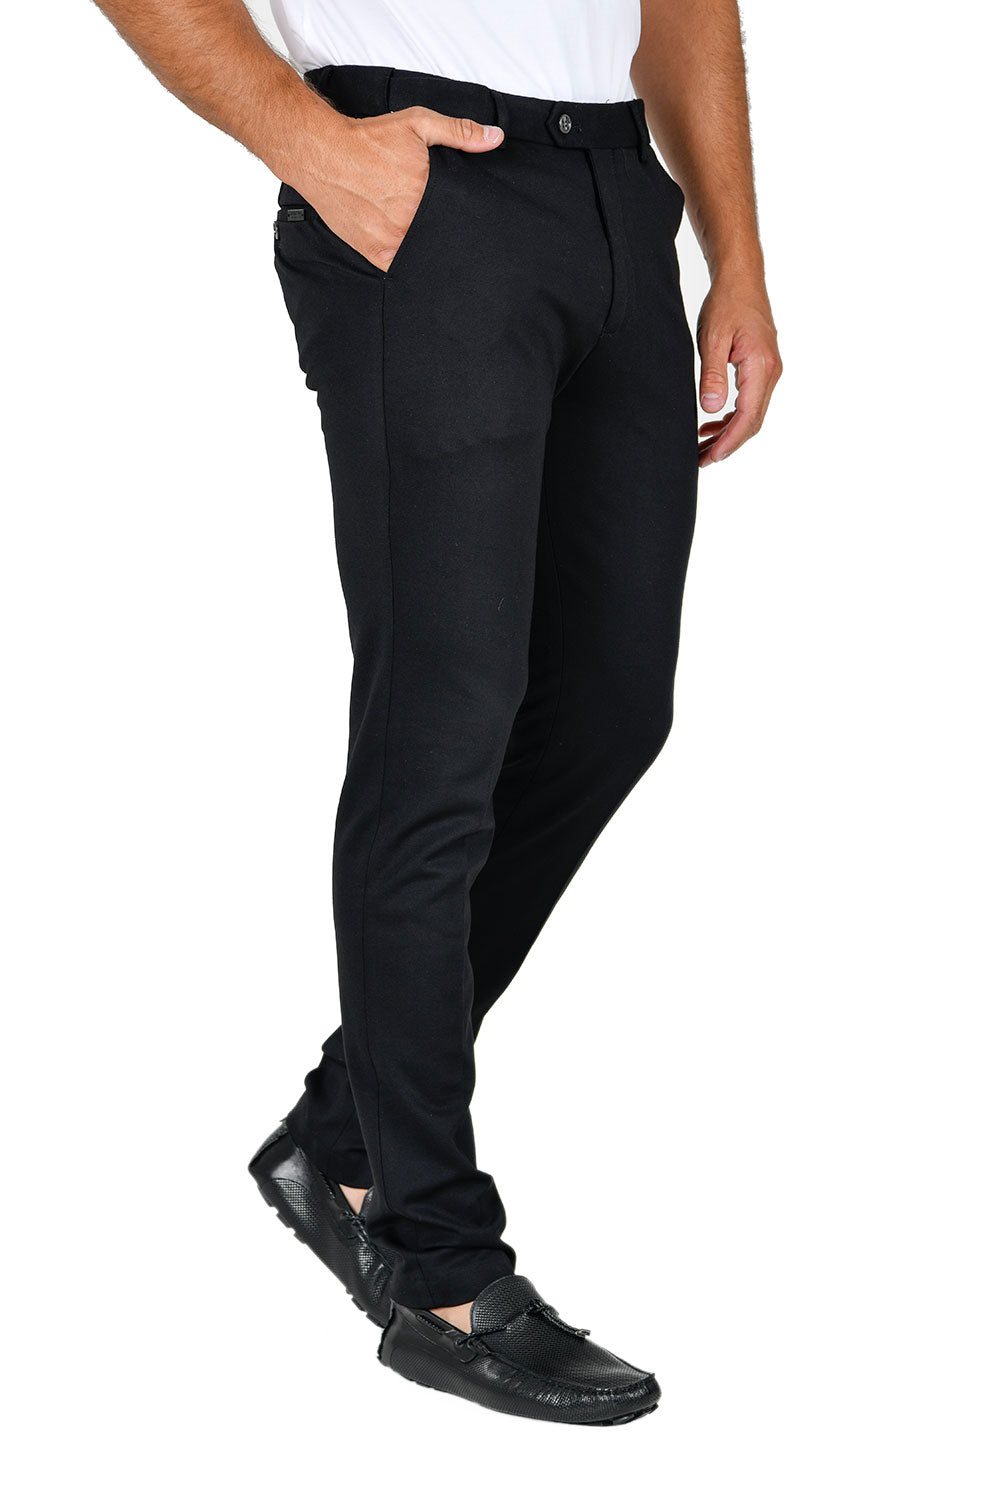 Barabas Men's Solid Color Basic Essential Chino Dress Pants CP4007 Black